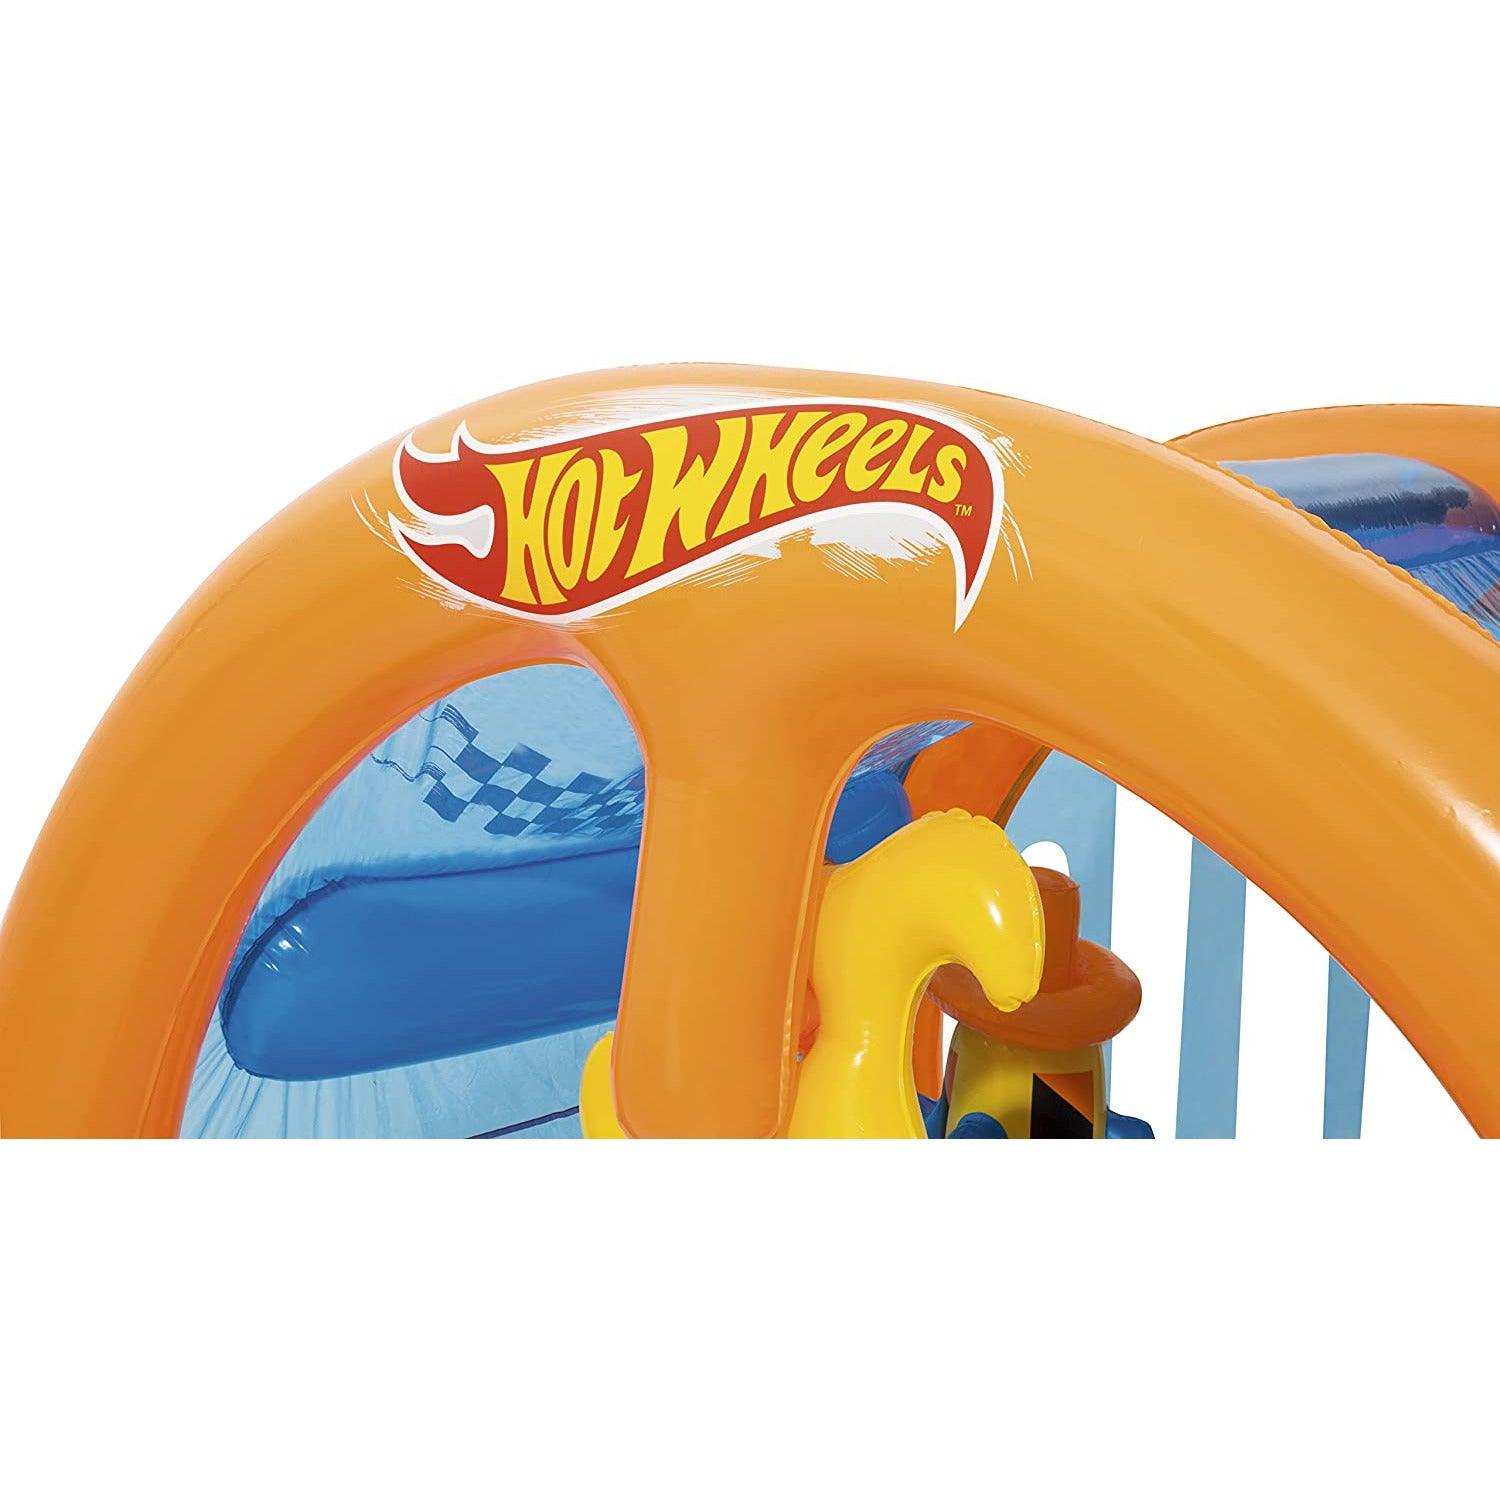 Bestway 93406 Car Wash Center Hot Wheels 1.53m x 1.31m x 1.50m - BumbleToys - 8-13 Years, Boys, Eagle Plus, Floaters, Girls, Sand Toys Pools & Inflatables, unicorn